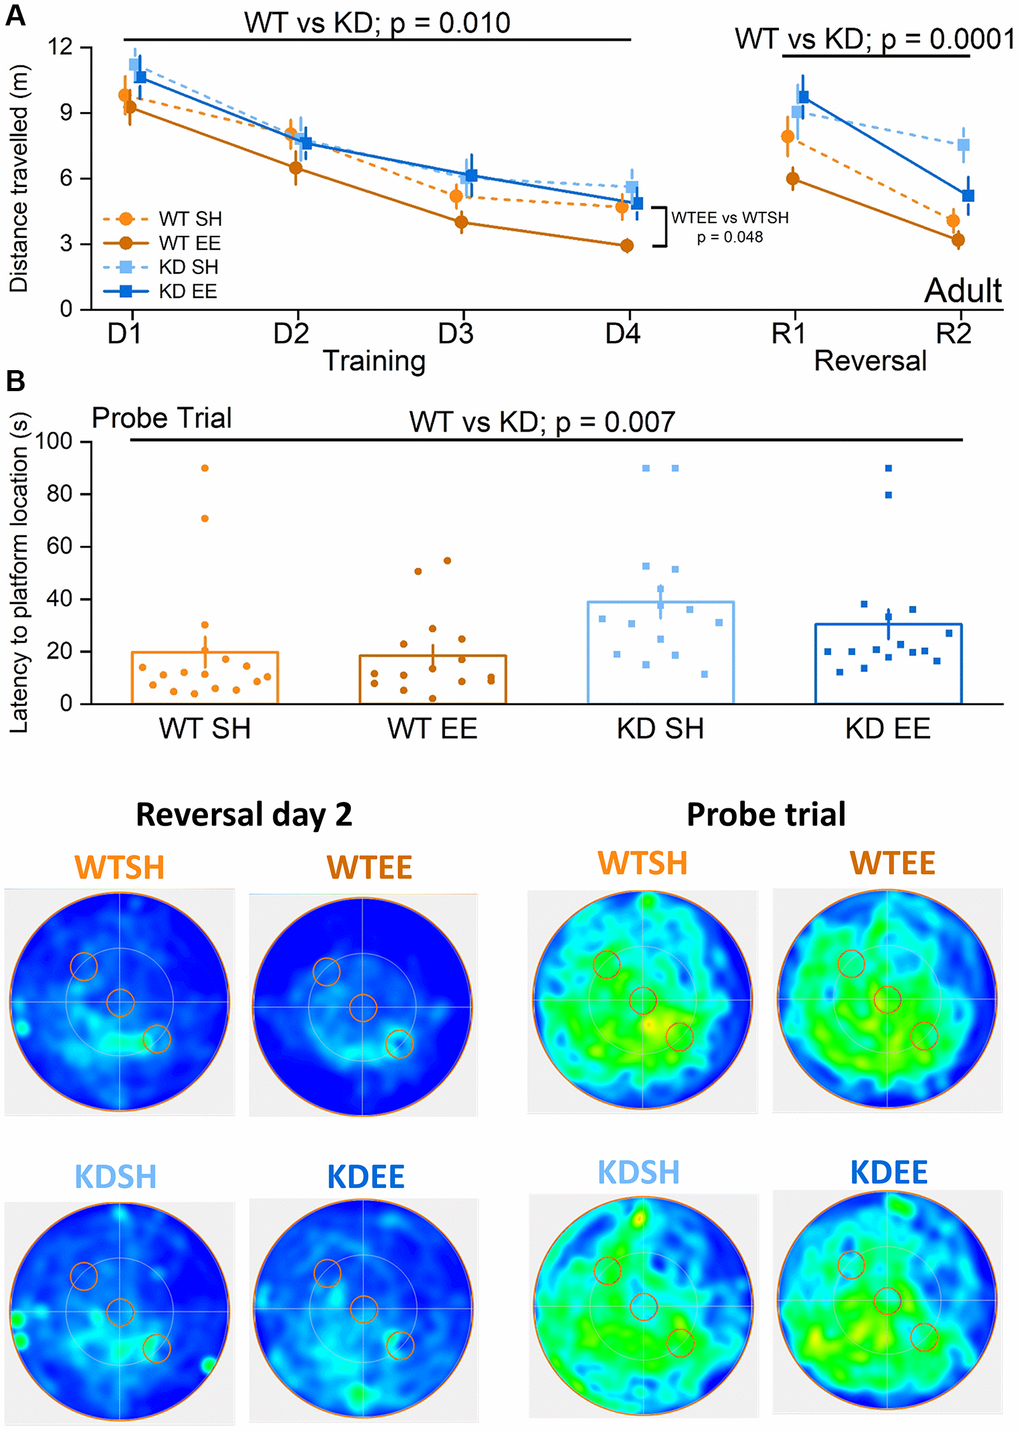 Environmental enrichment improves cognitive flexibility in adult mice via MSK1. No differences were observed across groups in the visual cue version of the test (Genotype: F(1,59) = 0.09, p = 0.760; Housing: F(1,59) = 1.17, p = 0.280; Genotype x Housing: F(1,59) = 2.57, p = 0.110; data not shown) suggesting comparable levels of visual acuity, swimming ability and motivation to navigate to the platform. (A) All four Adult groups showed learning over the first stage of training (Days (D) 1–4). The RM-ANOVA on distance swum to reach the escape platform showed a significant effect of Session F(3,177) = 52.38, p p = 0.010 where WT mice performed better than MSK1 KD mutant mice. Although there was no significant interaction of Genotype x Housing, the enriched WT mice were significantly better than standard-housed WT mice (F(1,59) = 4.09 p = 0.048) while no significant difference was seen between standard-housed or enriched MSK1 KD mice (F(1,59) = 0.32, p = 0.570). On the Reversal (R) learning stage (2 days) the RM-ANOVA on the distance swum to reach the new escape platform location showed an effect of session F(1,59) = 36.53 p p = 0.0001 indicating that all groups learned over the time but WT mice performed better than MSK1 KD mice. Although there was no significant interaction, the WT mice performed much better than the MSK1 KD mice in both standard and enriched housing (F(1,59) = 6.77, p = 0.012 and F(1,59) = 10.37, p = 0.002, respectively). Data are presented as mean ± SEM. (B) On the probe trial 24 hours later WT mice showed the best goal directed behaviour for the reversed location of the escape platform (south west quadrant) and the standard-housed MSK1 KD mutant mice showed the worst performance. The Univariate ANOVA on the total time spent in the reversal quadrant (where the platform had been last) showed a strong effect for Genotype (F(1,59) = 9.15, p = 0.004; not shown). The effect of genotype was also significant for latency to enter the Reversal platform area (F = 7.91 p = 0.007). Although the interaction did not reach significance, the Simple Main effects showed a significant difference on the time spent in the reversal platform quadrant between enriched WT mice and enriched MSK1 KD mice (F(1,59) = 9.28, p = 0.003) and between standard-housed WT and MSK1 KD mice on the latency to reach the reversal platform location (F(1,59) = 6.07, p = 0.017). Heatmaps below the graphs depict the arena occupancy for the mice of each group during the last day of reversal learning and the Probe trial. Individual data points are presented for each animal, with the bar graph representing the mean ± SEM of the data.